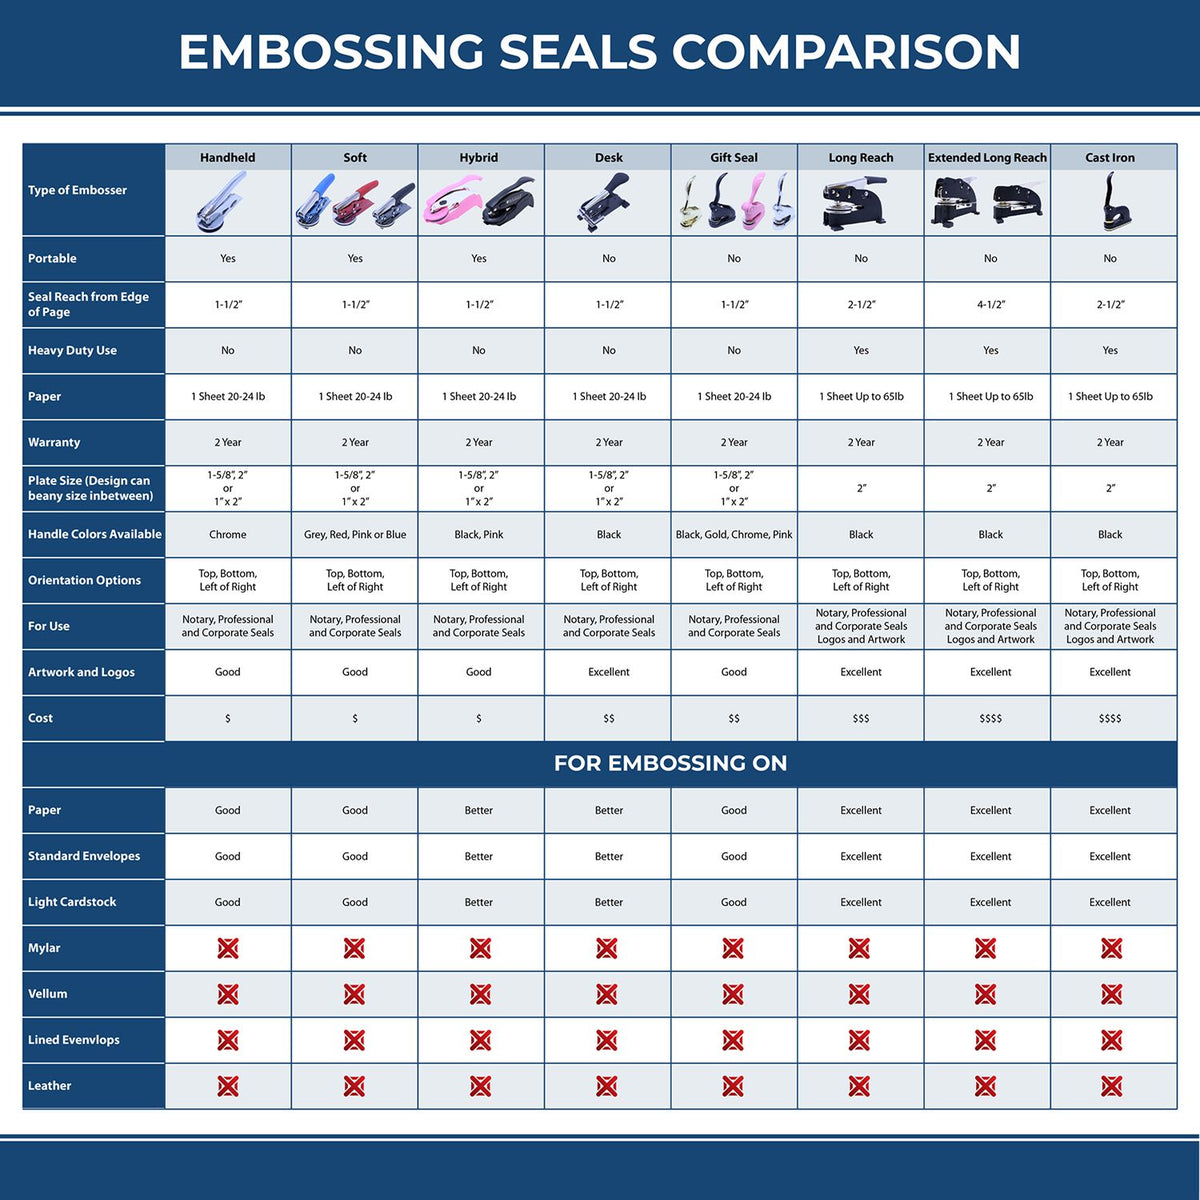 A comparison chart for the different types of mount models available for the Soft Pocket Pennsylvania Landscape Architect Embosser.